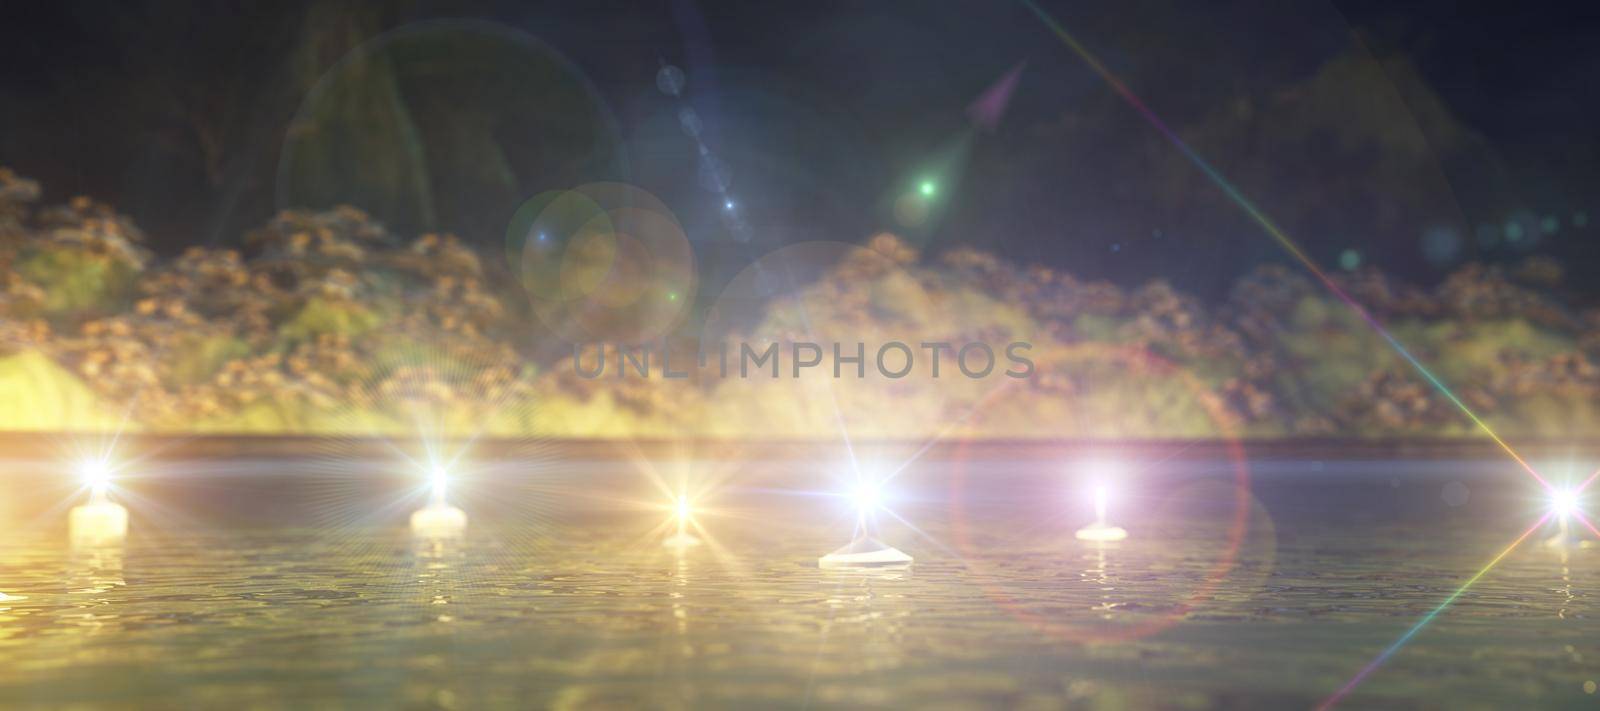 Abstract night background with candles in the water, 3d rendering illustration